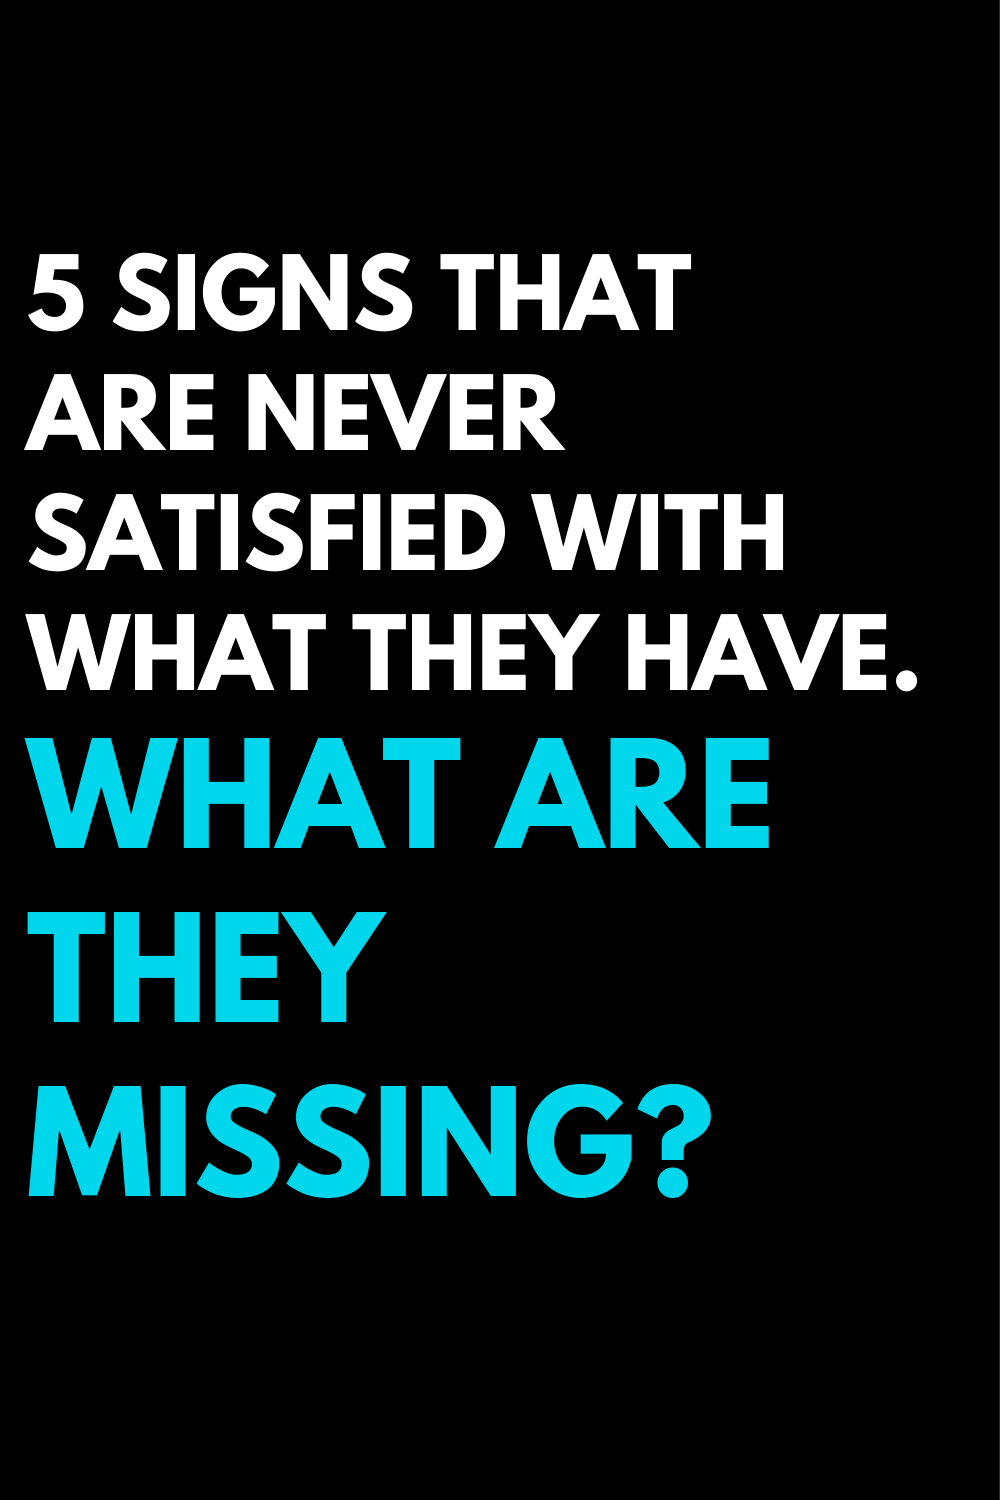 5 signs that are never satisfied with what they have. What are they missing?